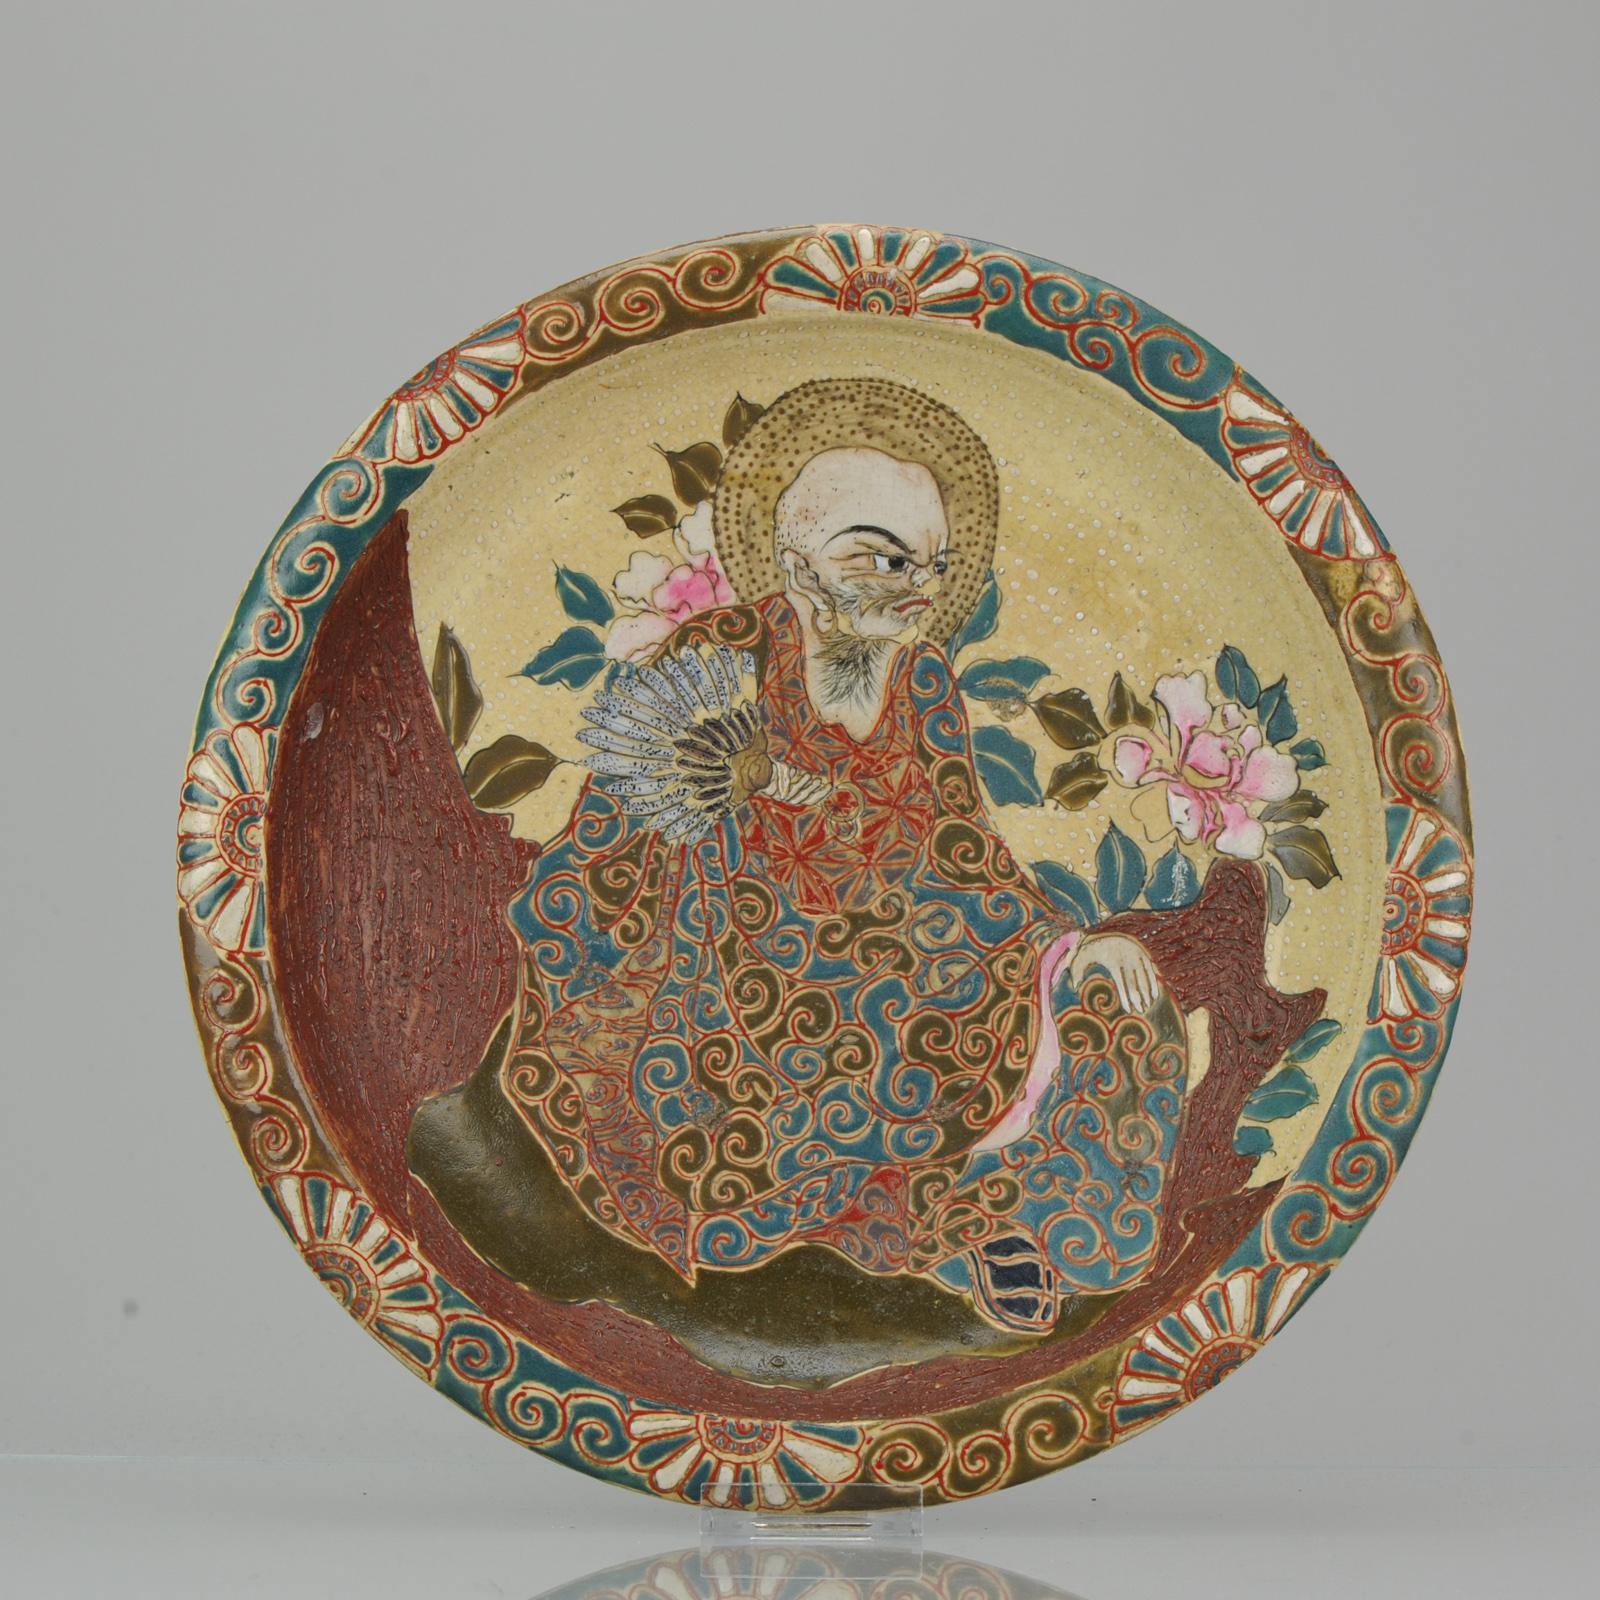 Very lovely piece. With an overall landscape scene of mountains, flowers and birds in flight.

Condition
Upper rim is over fired and has some repainting. Size 150 x 150mm DXH
Period
Meiji Periode (1867-1912).